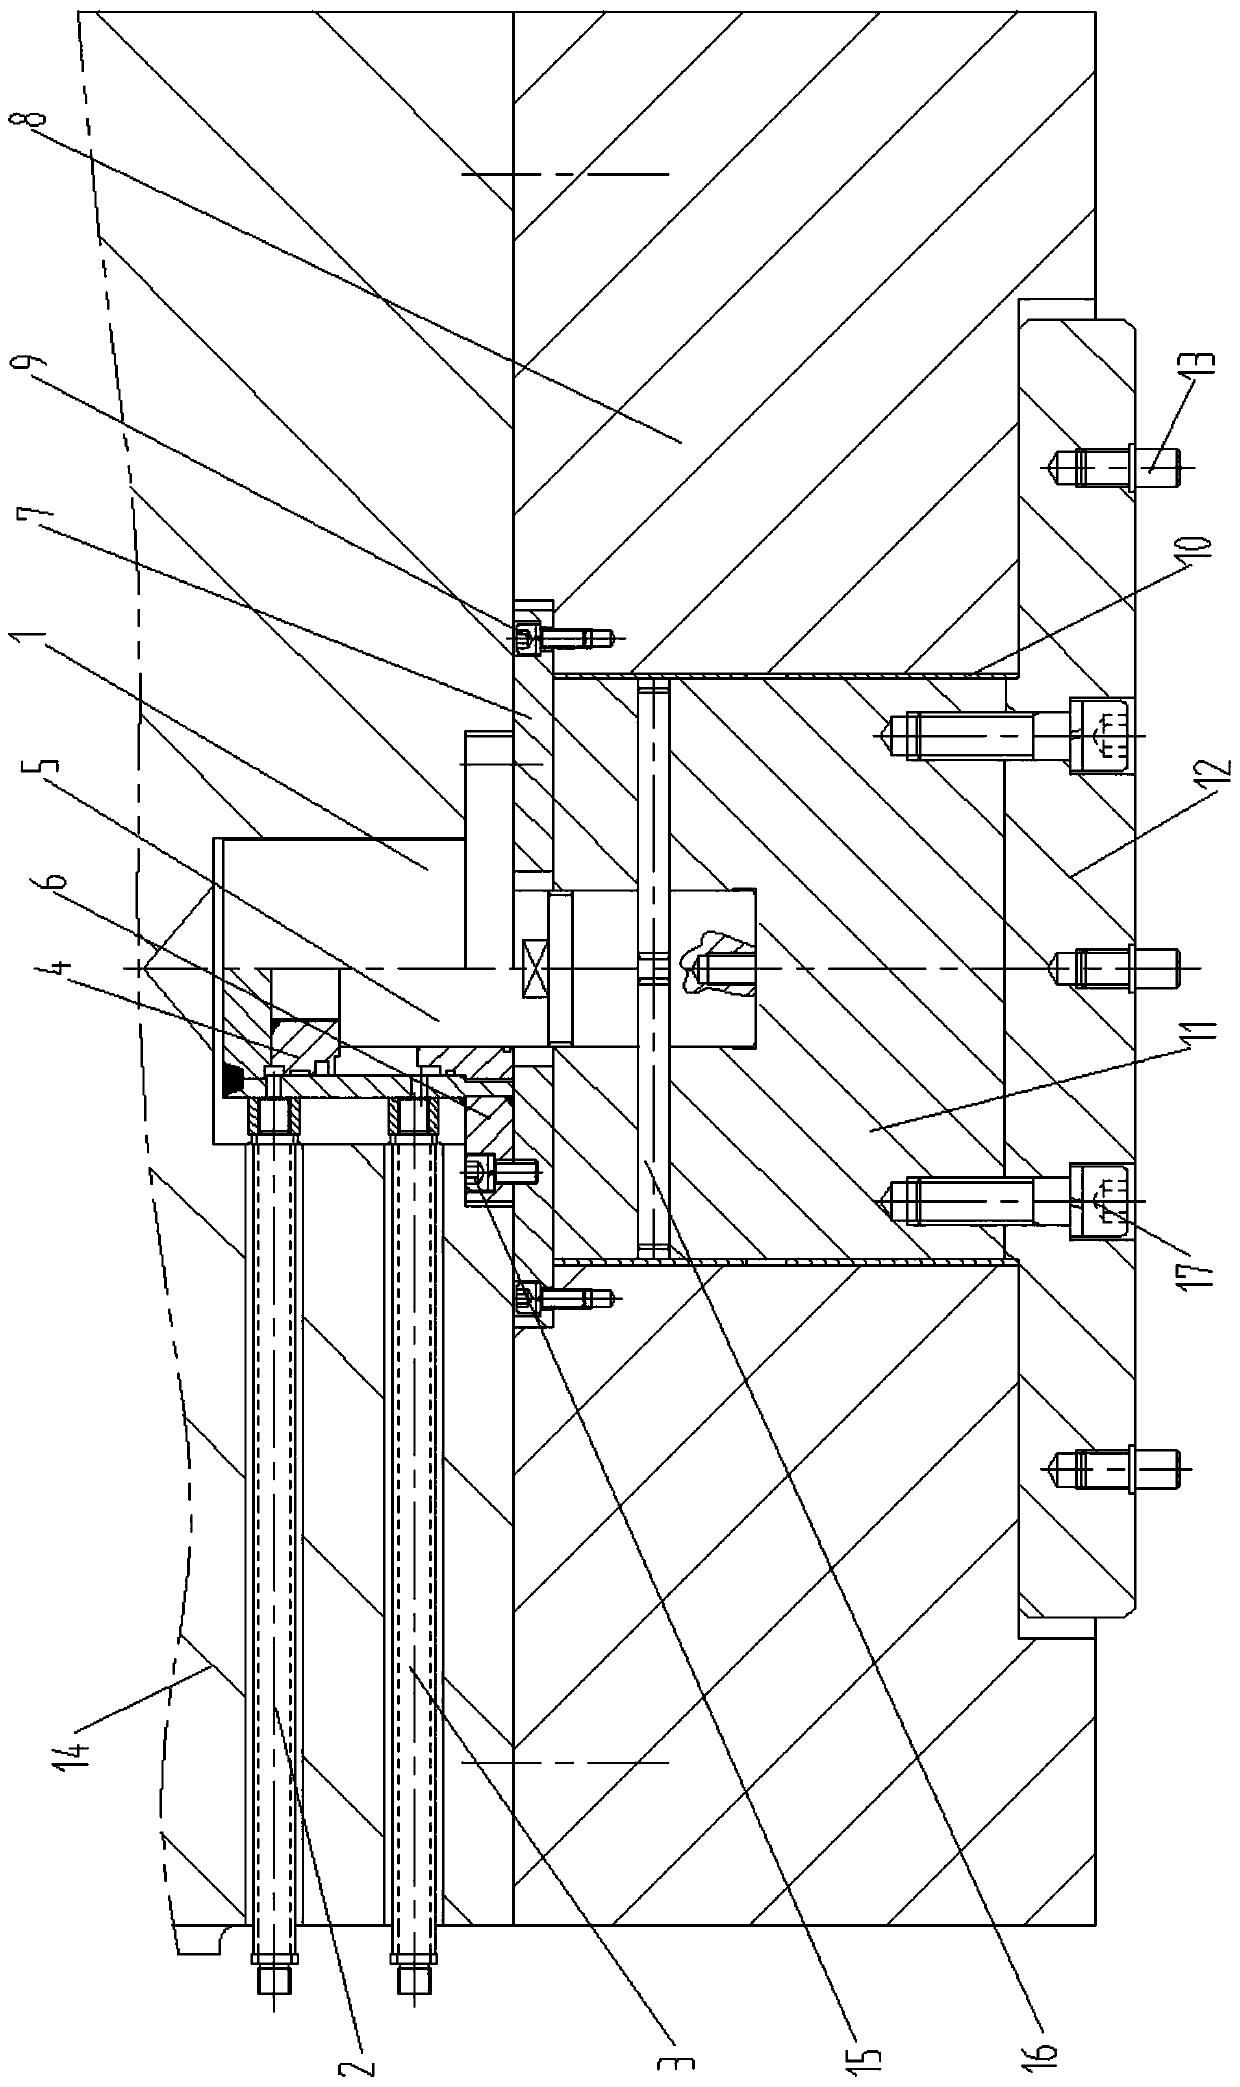 Upper jacking system with multi-station jacking function